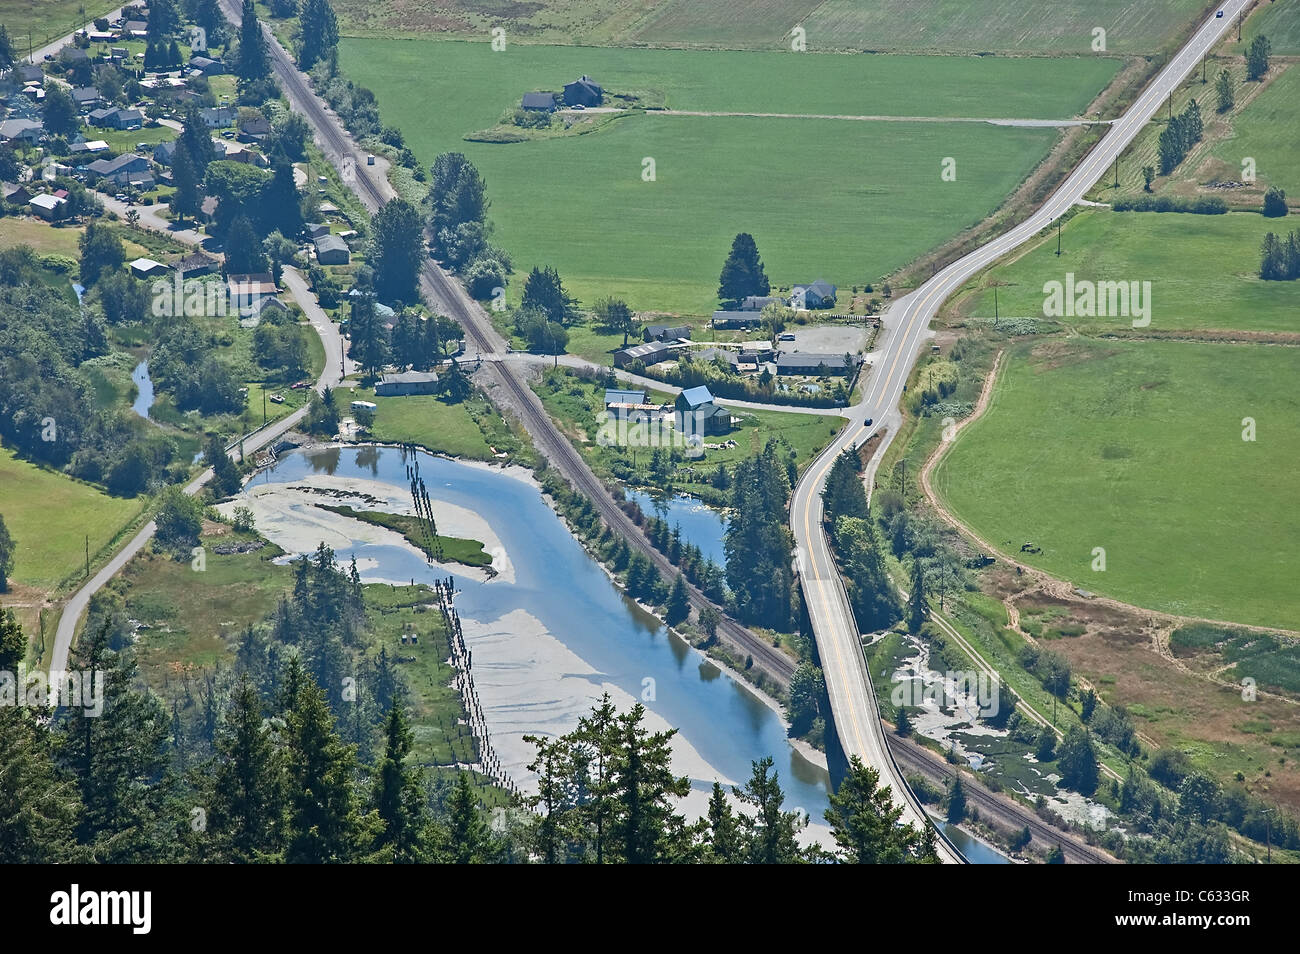 Aerial view of a small town, country life with roads, rivers, farms and fields of Blanchard, WA in Skagit County, America. Stock Photo